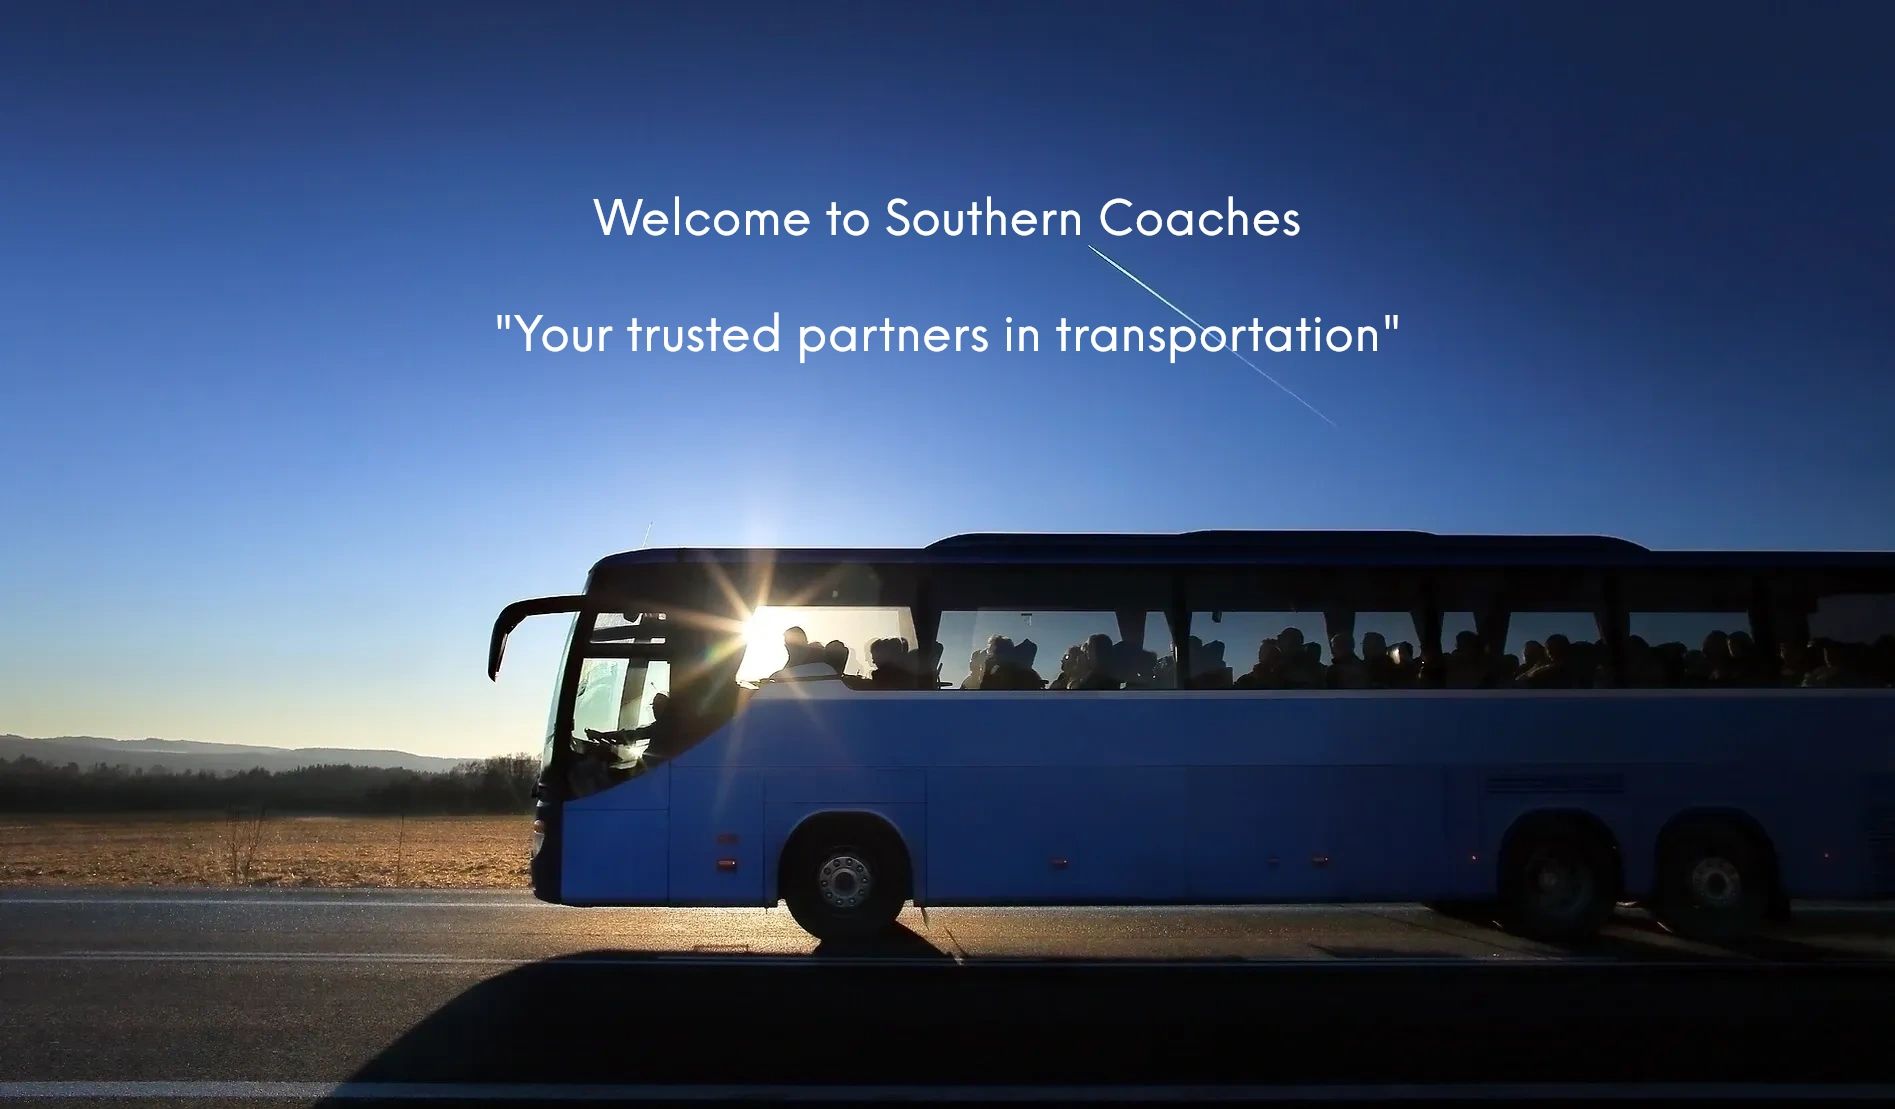 An Image of a Bus With a Welcome Quote From Southern Coaches